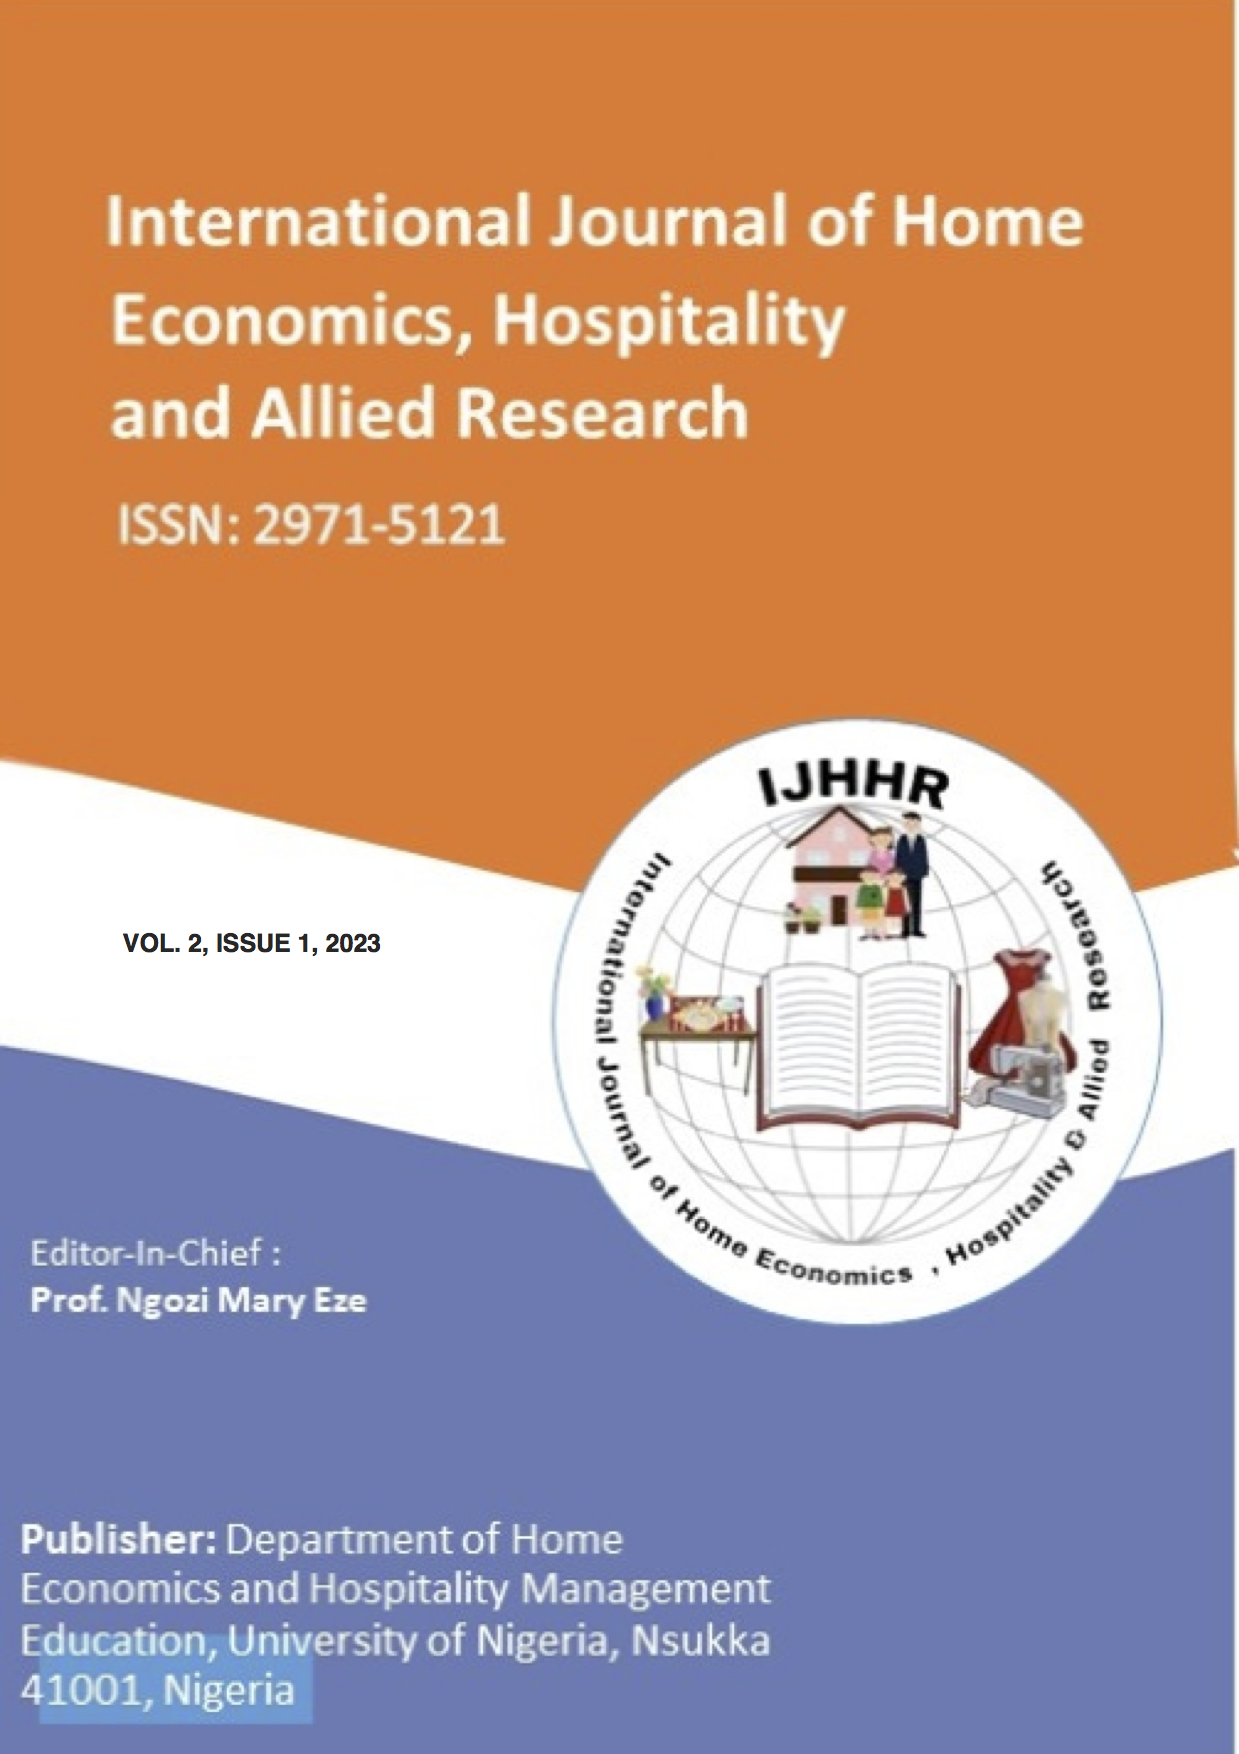 International Journal of Home Economics, Hospitality and Allied Research